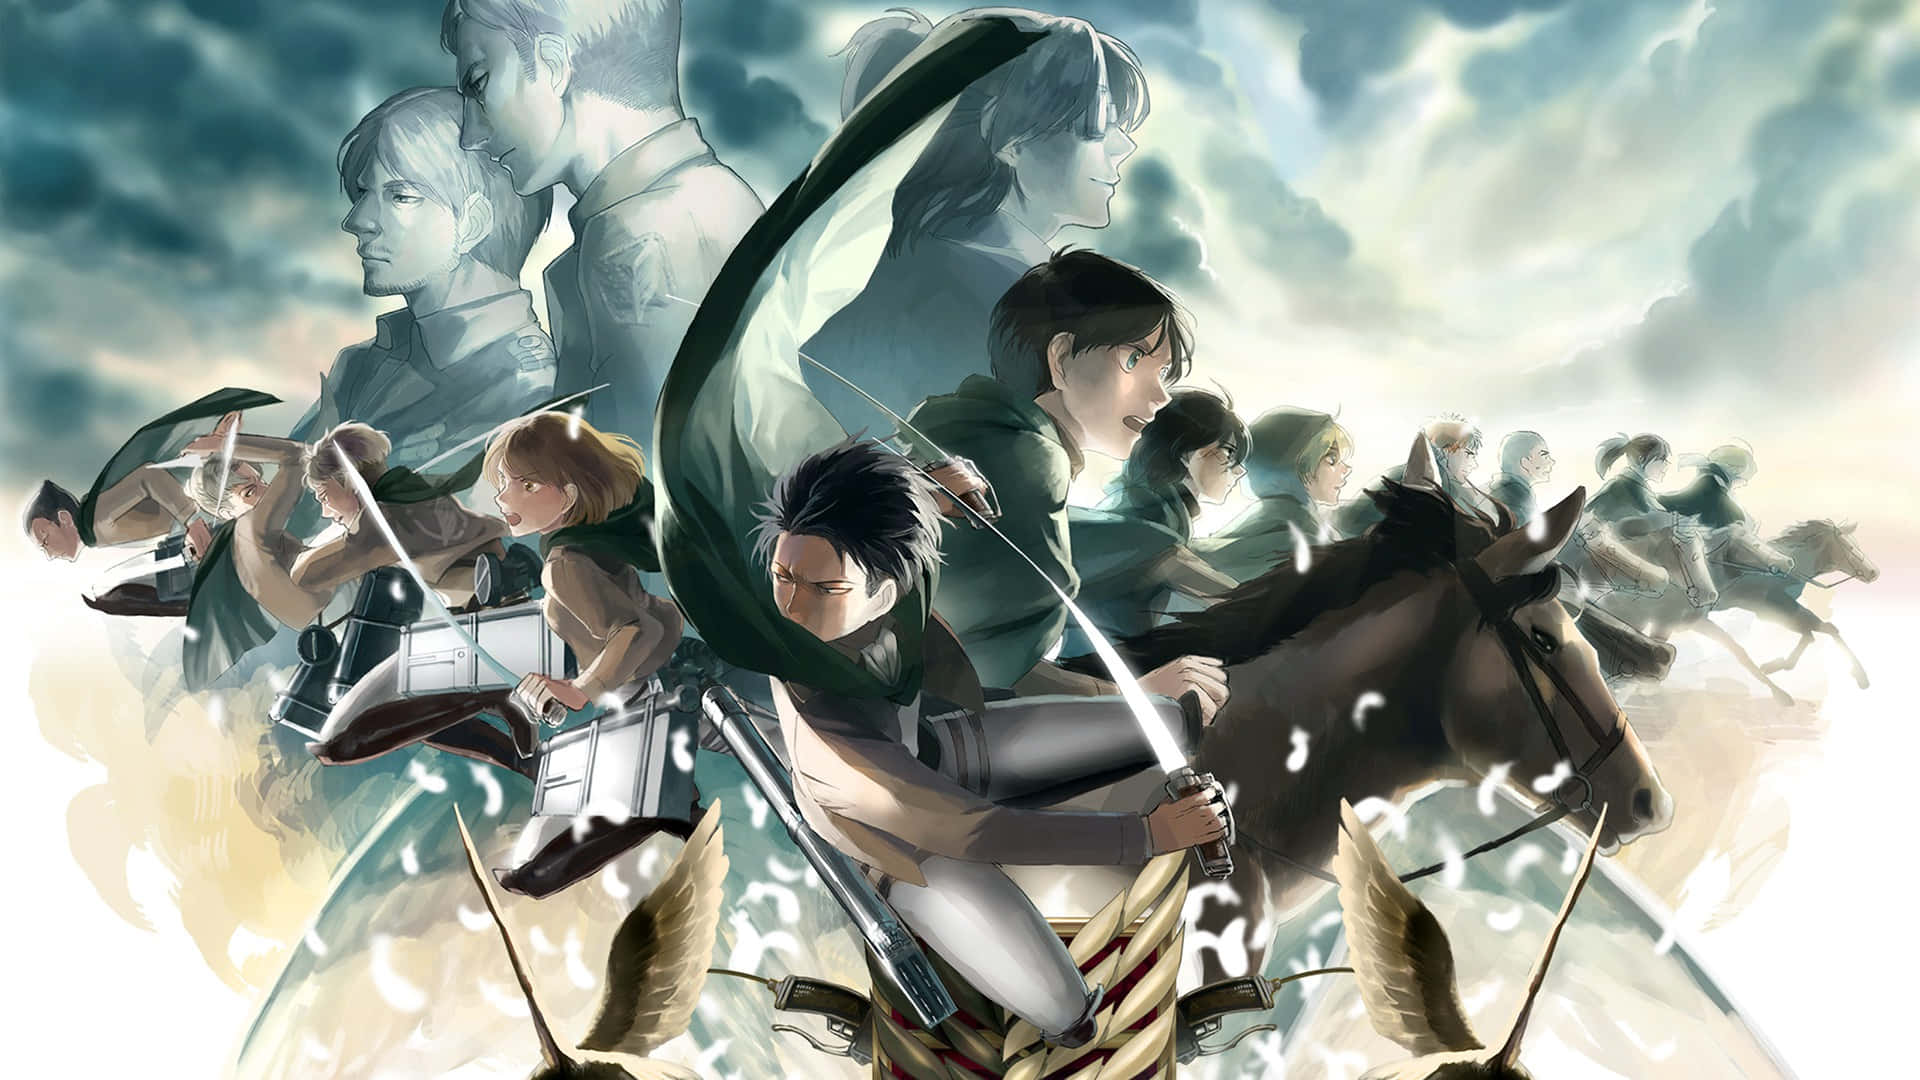 Lead the charge with the Survey Corps" Wallpaper